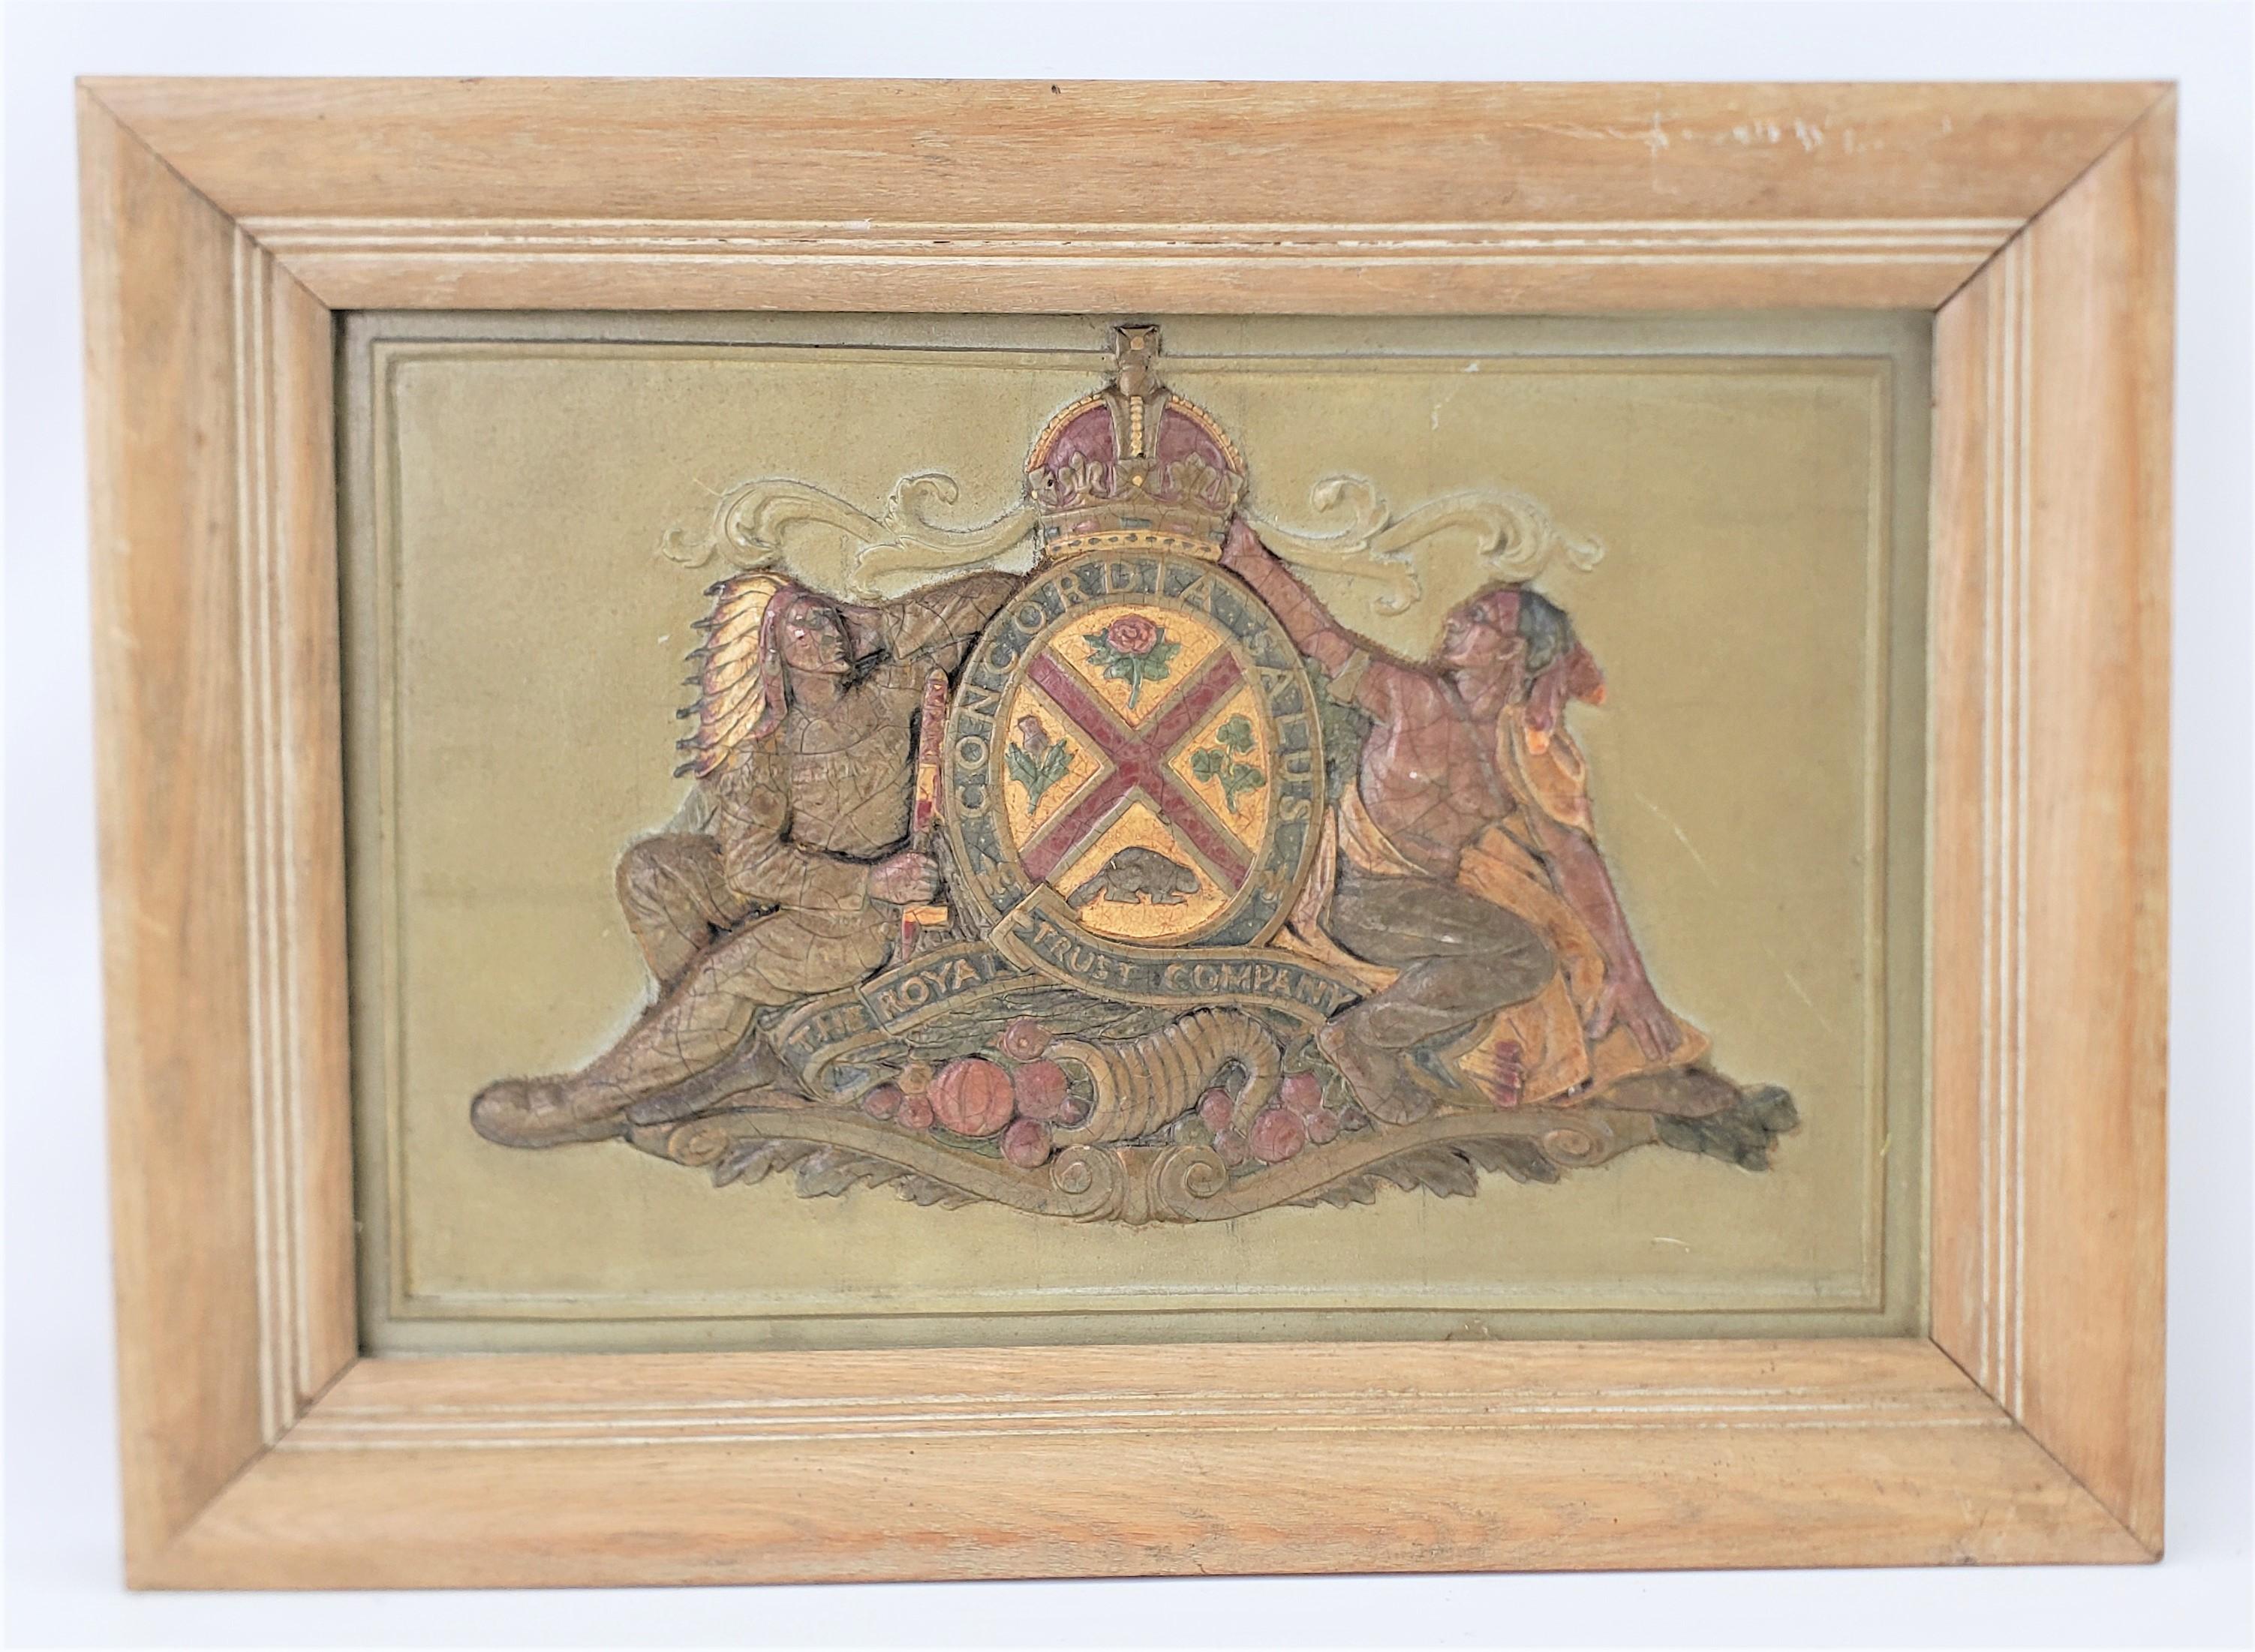 This wall plaque is unsigned with respect to the maker, but it is presumed to have been made in Canada in approximately 1950 in a traditional style. The plaque is composed of a very detailed casting with white metal or spelter that has been